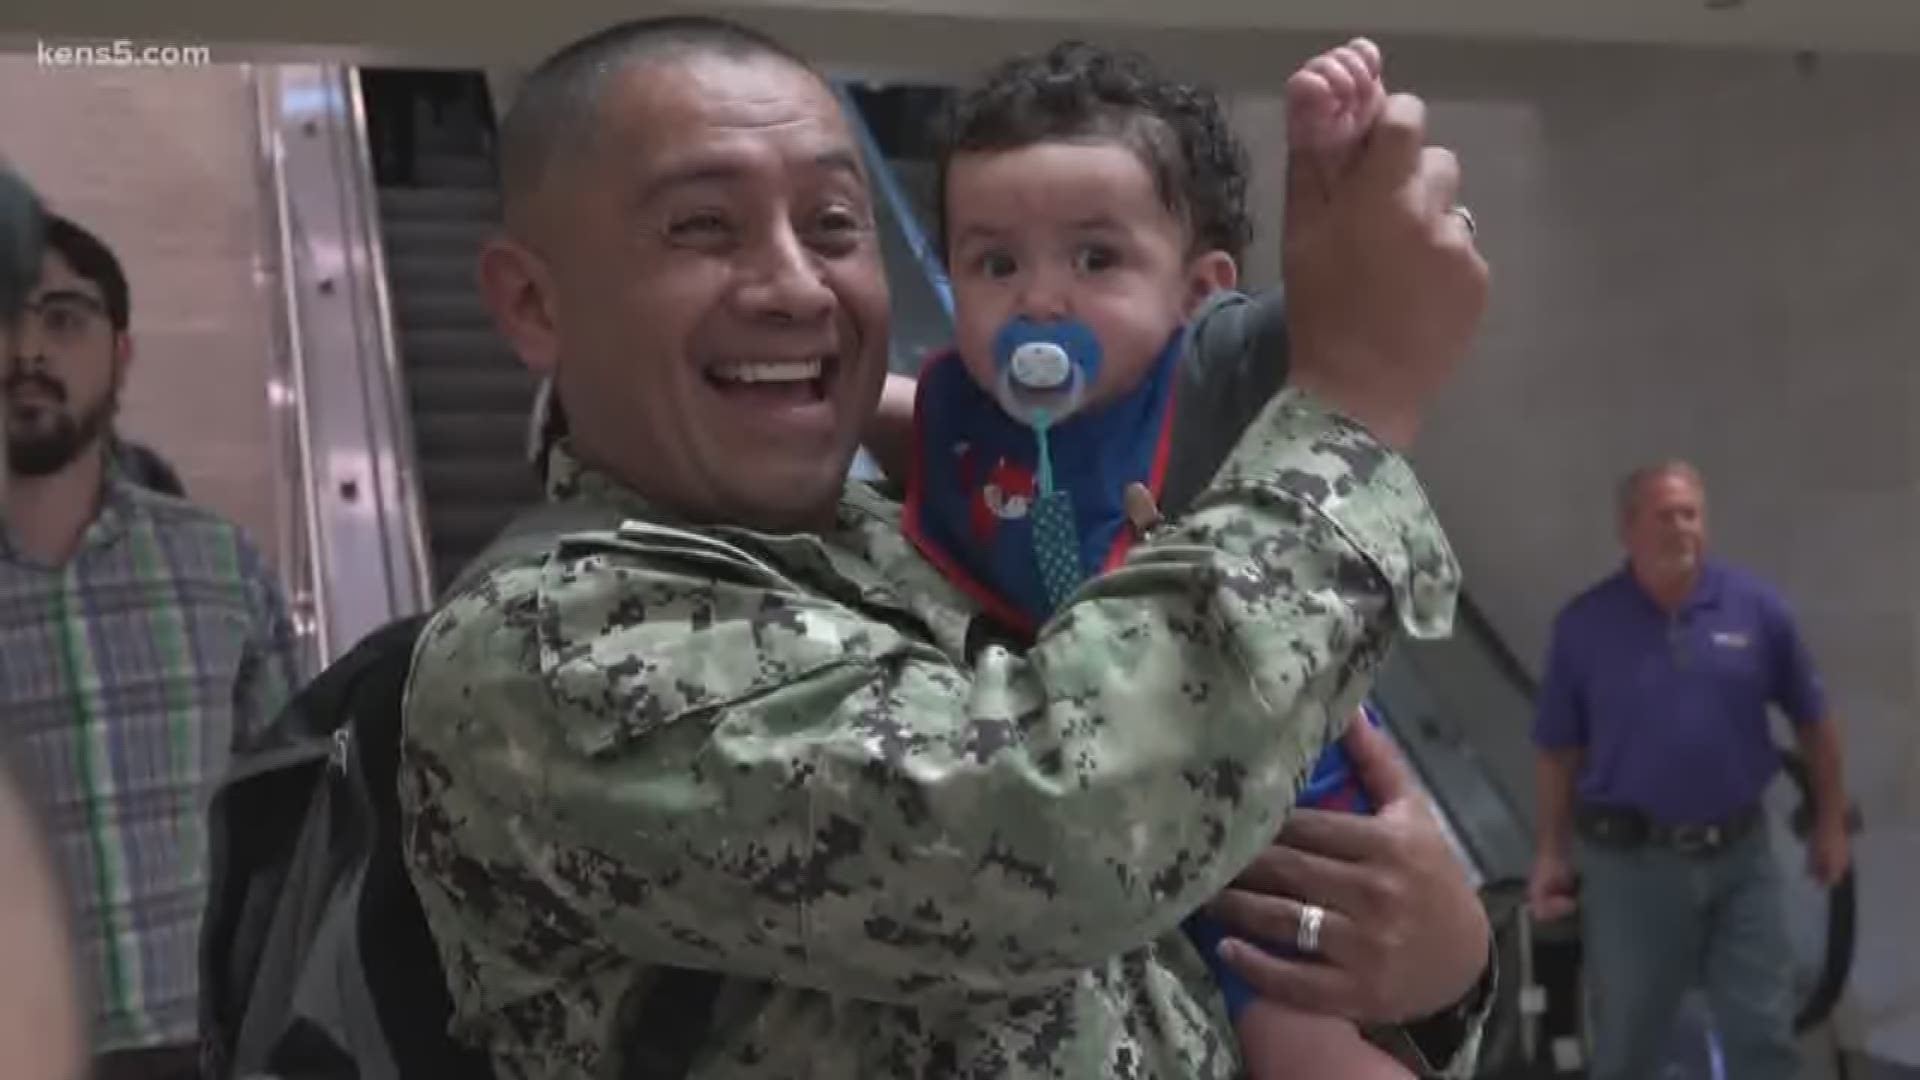 For the fifth time, Ramon Zertuche was welcome by family and friends as he returned from deployment. But the fifth time was the last time.